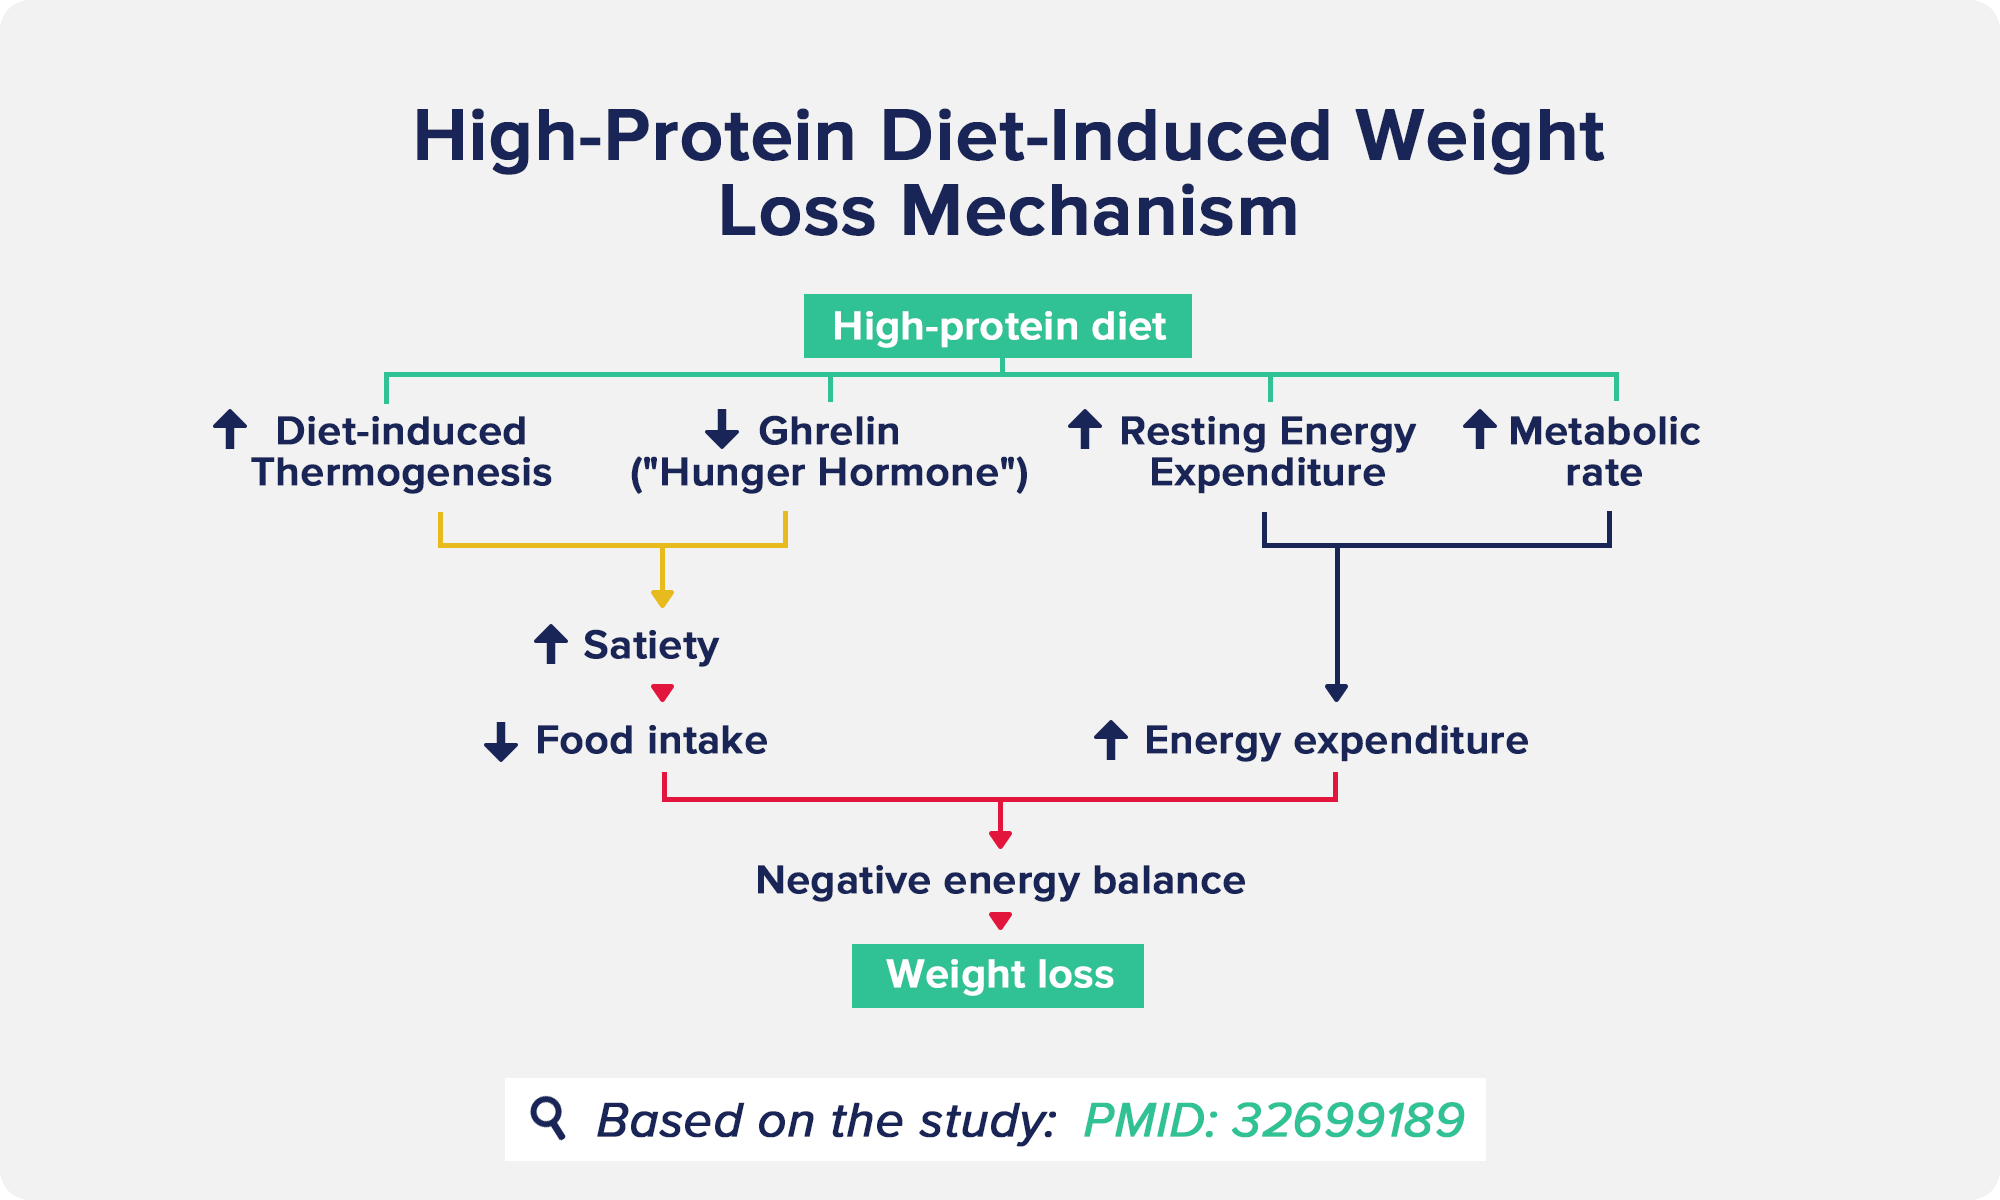 High-Protein Diet-Induced Weight Loss Mechanism